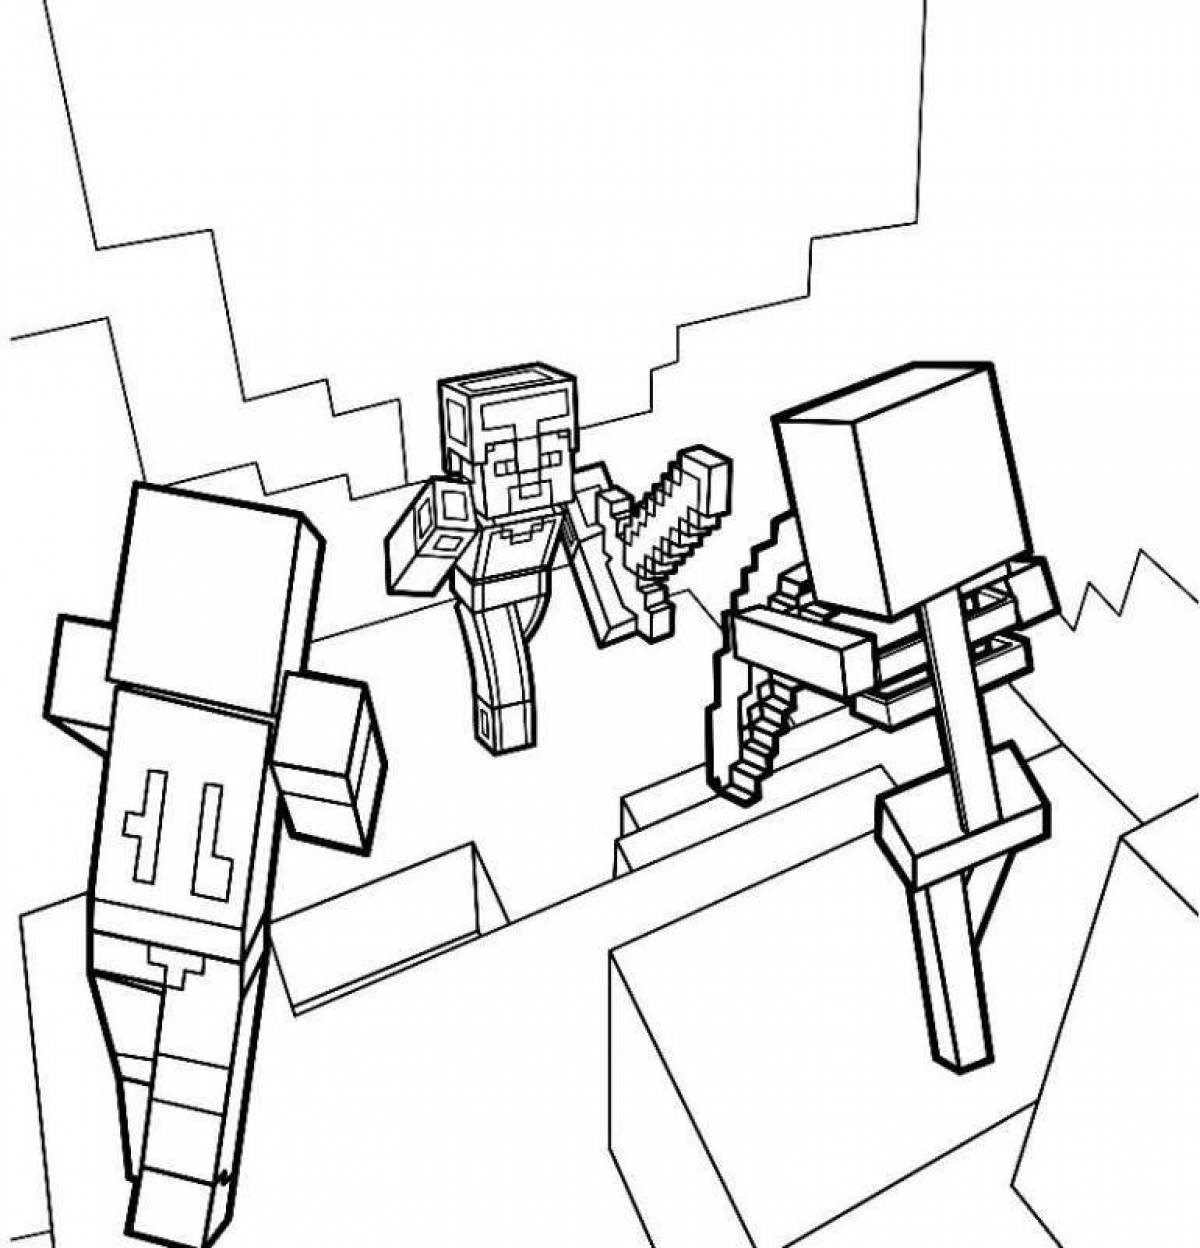 Colorful alex and steve minecraft coloring page